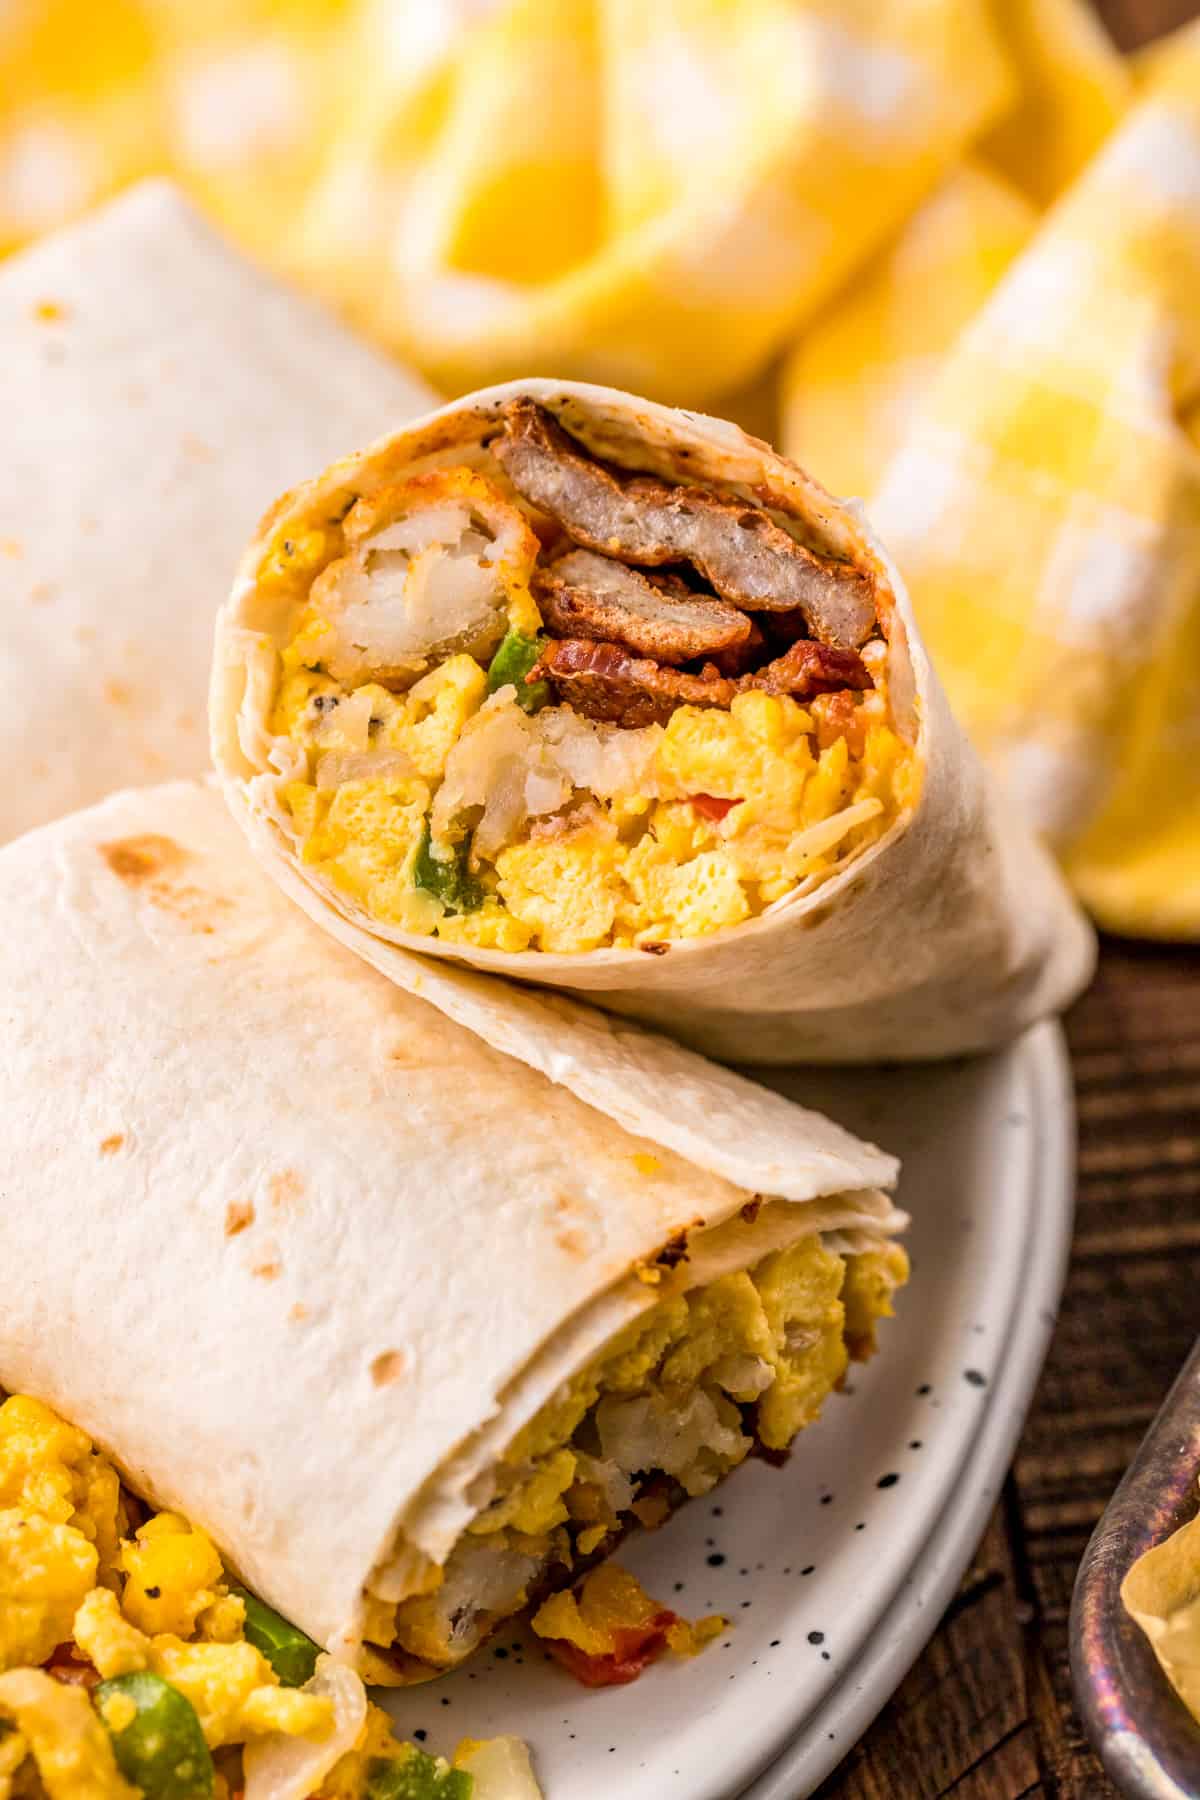 Breakfast Burrito Recipe cut in half with one half propped up on the other showing the inside.